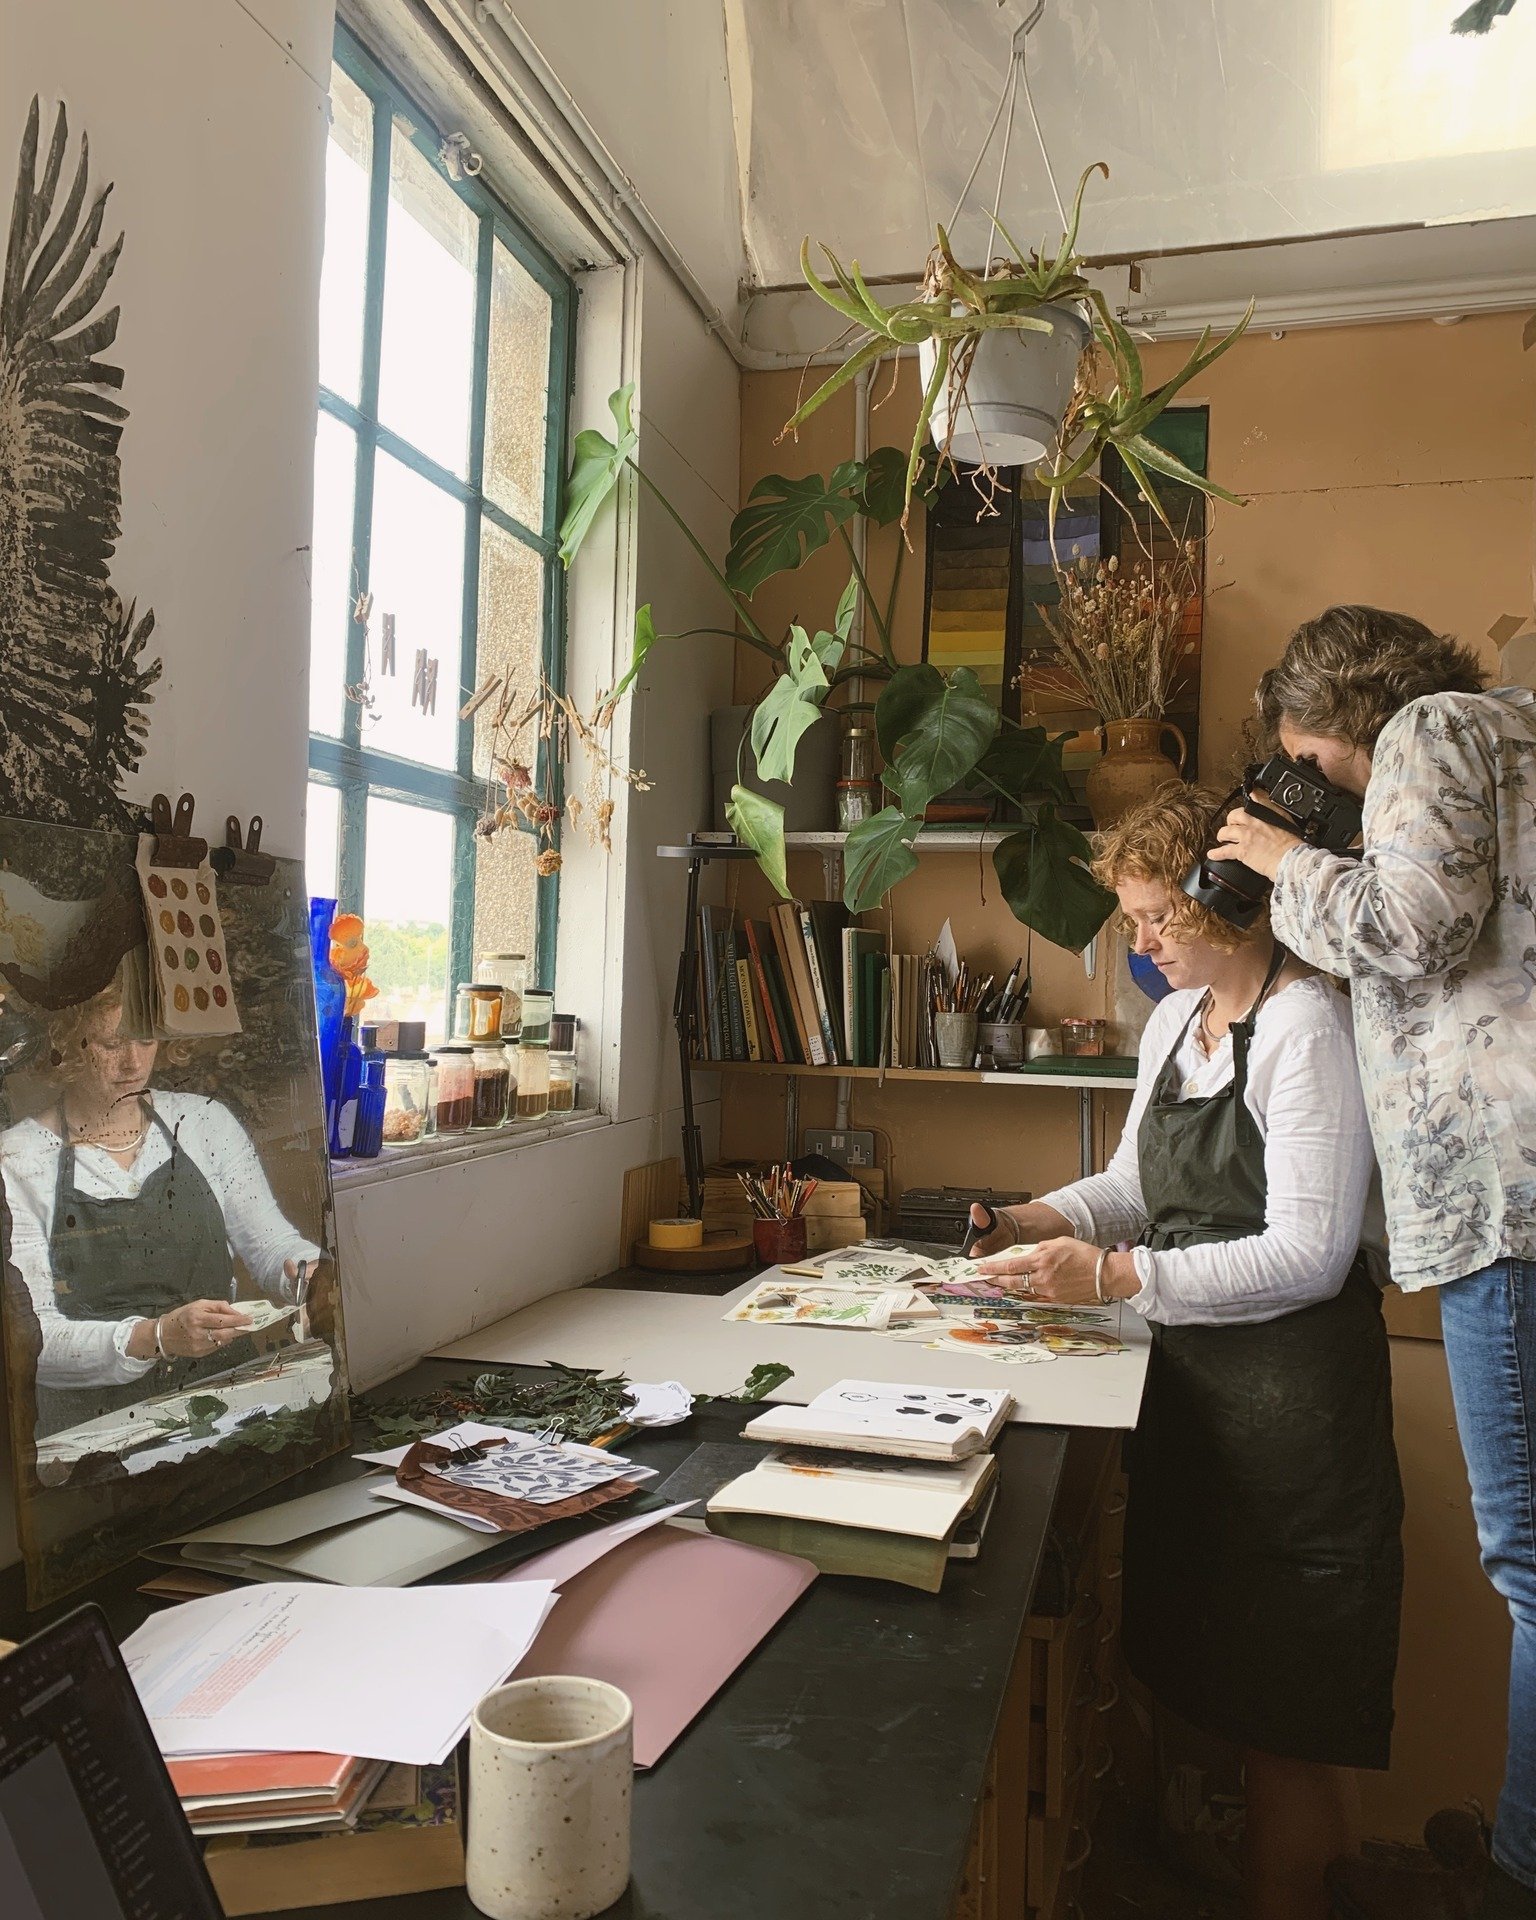 Some behind the scenes shots from the making of my book - 

Wonderful @eva_nemeth  @editorial_ellen and Alice joined me in my studio in the spring last year and then again in the summer to take the beautiful photos that feature throughout my book.

I